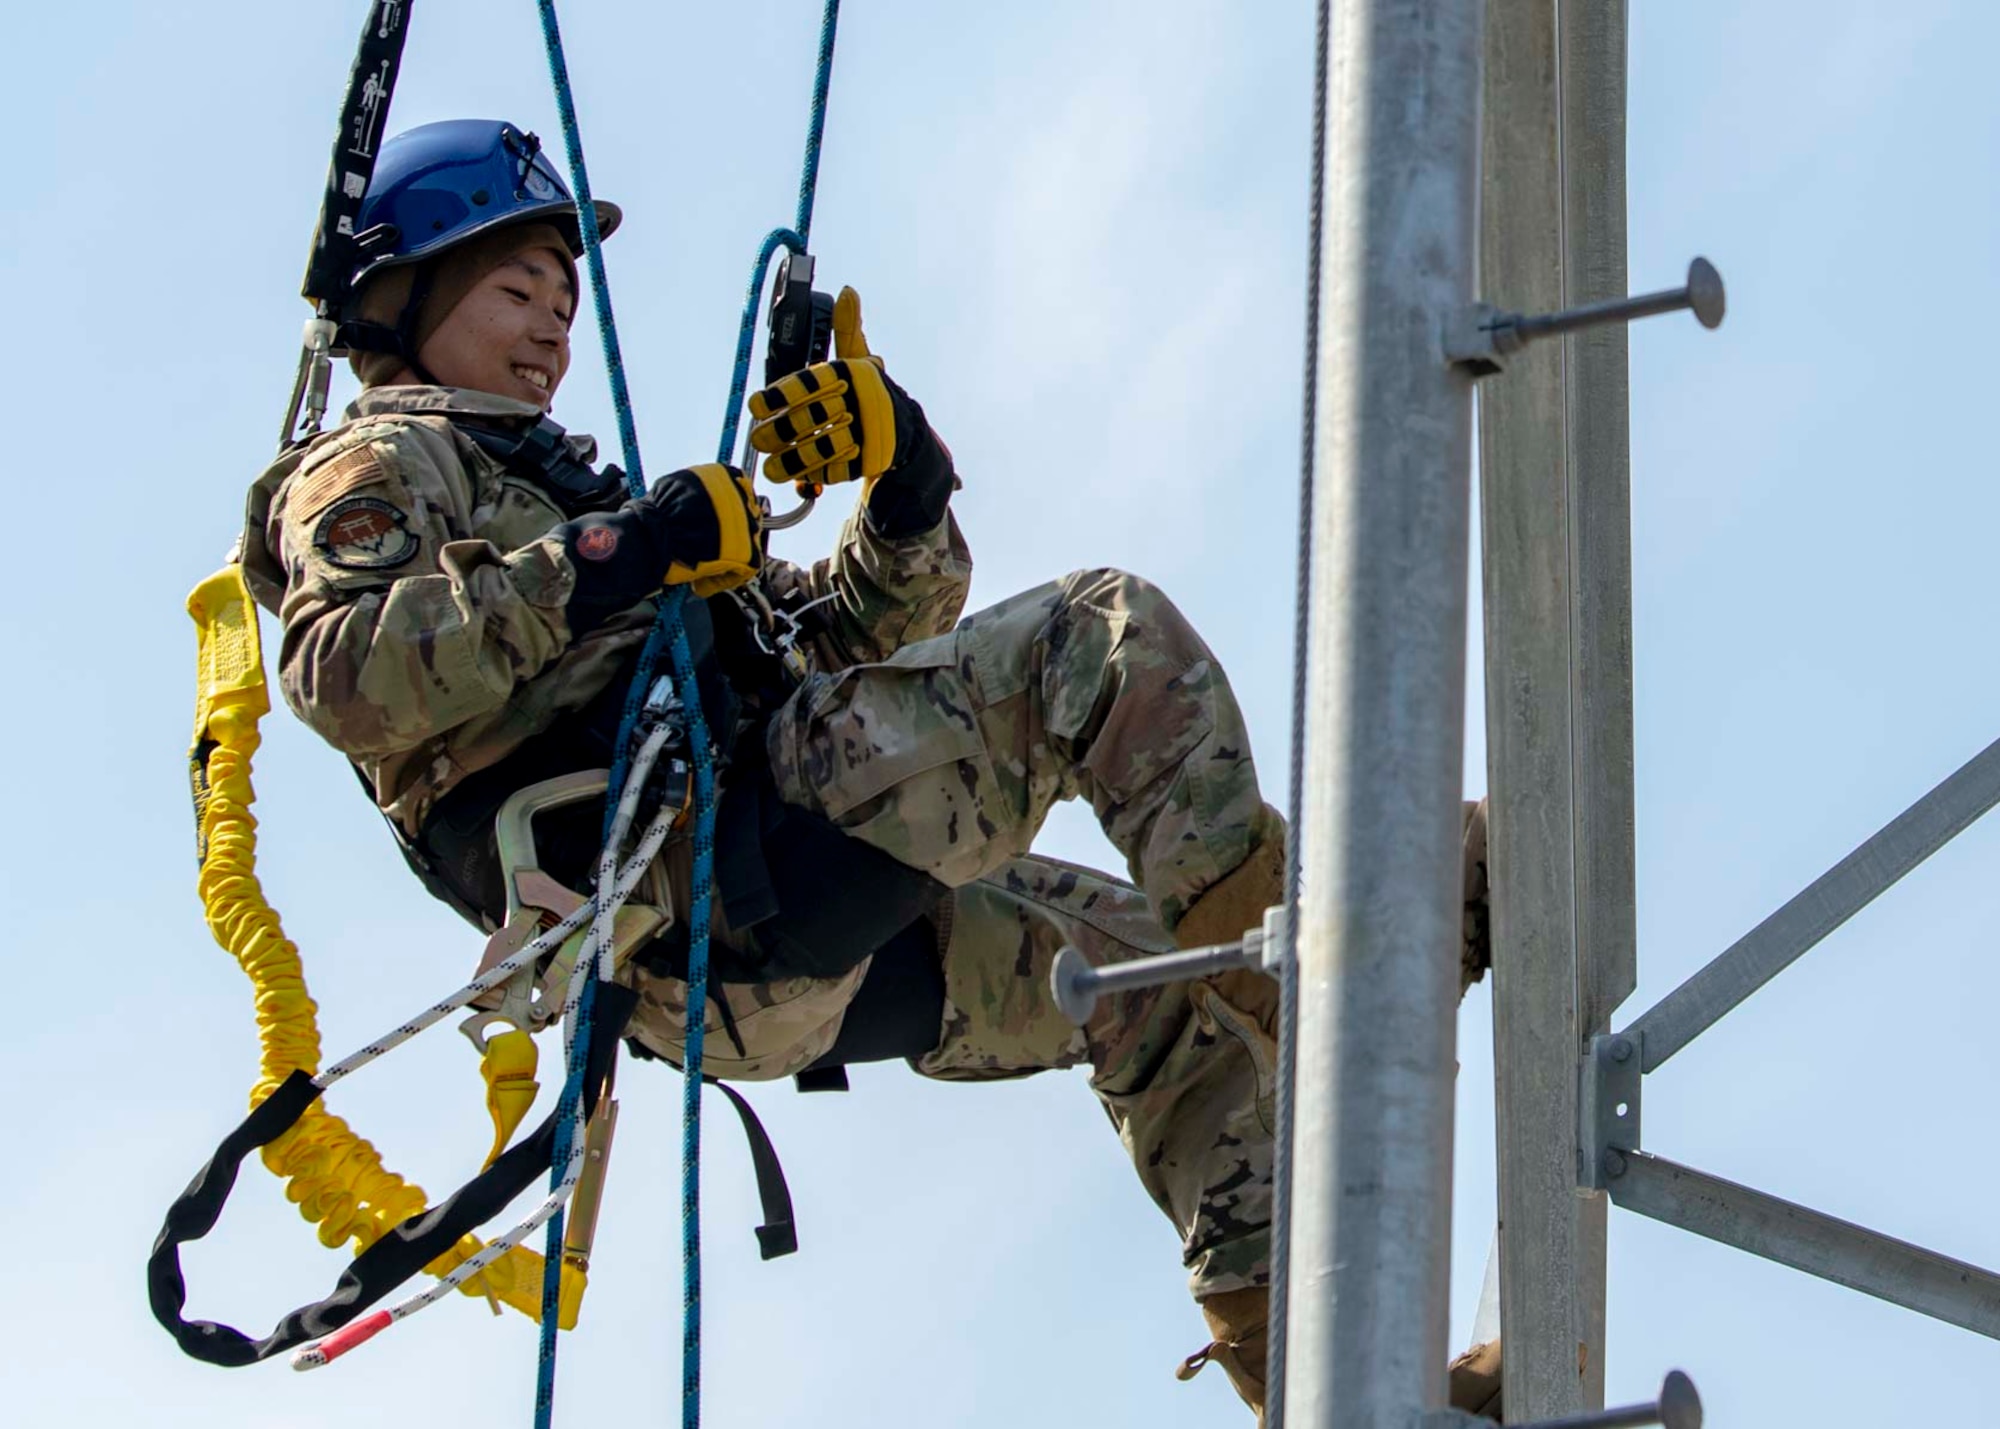 A military member climbs down the side of a tower.